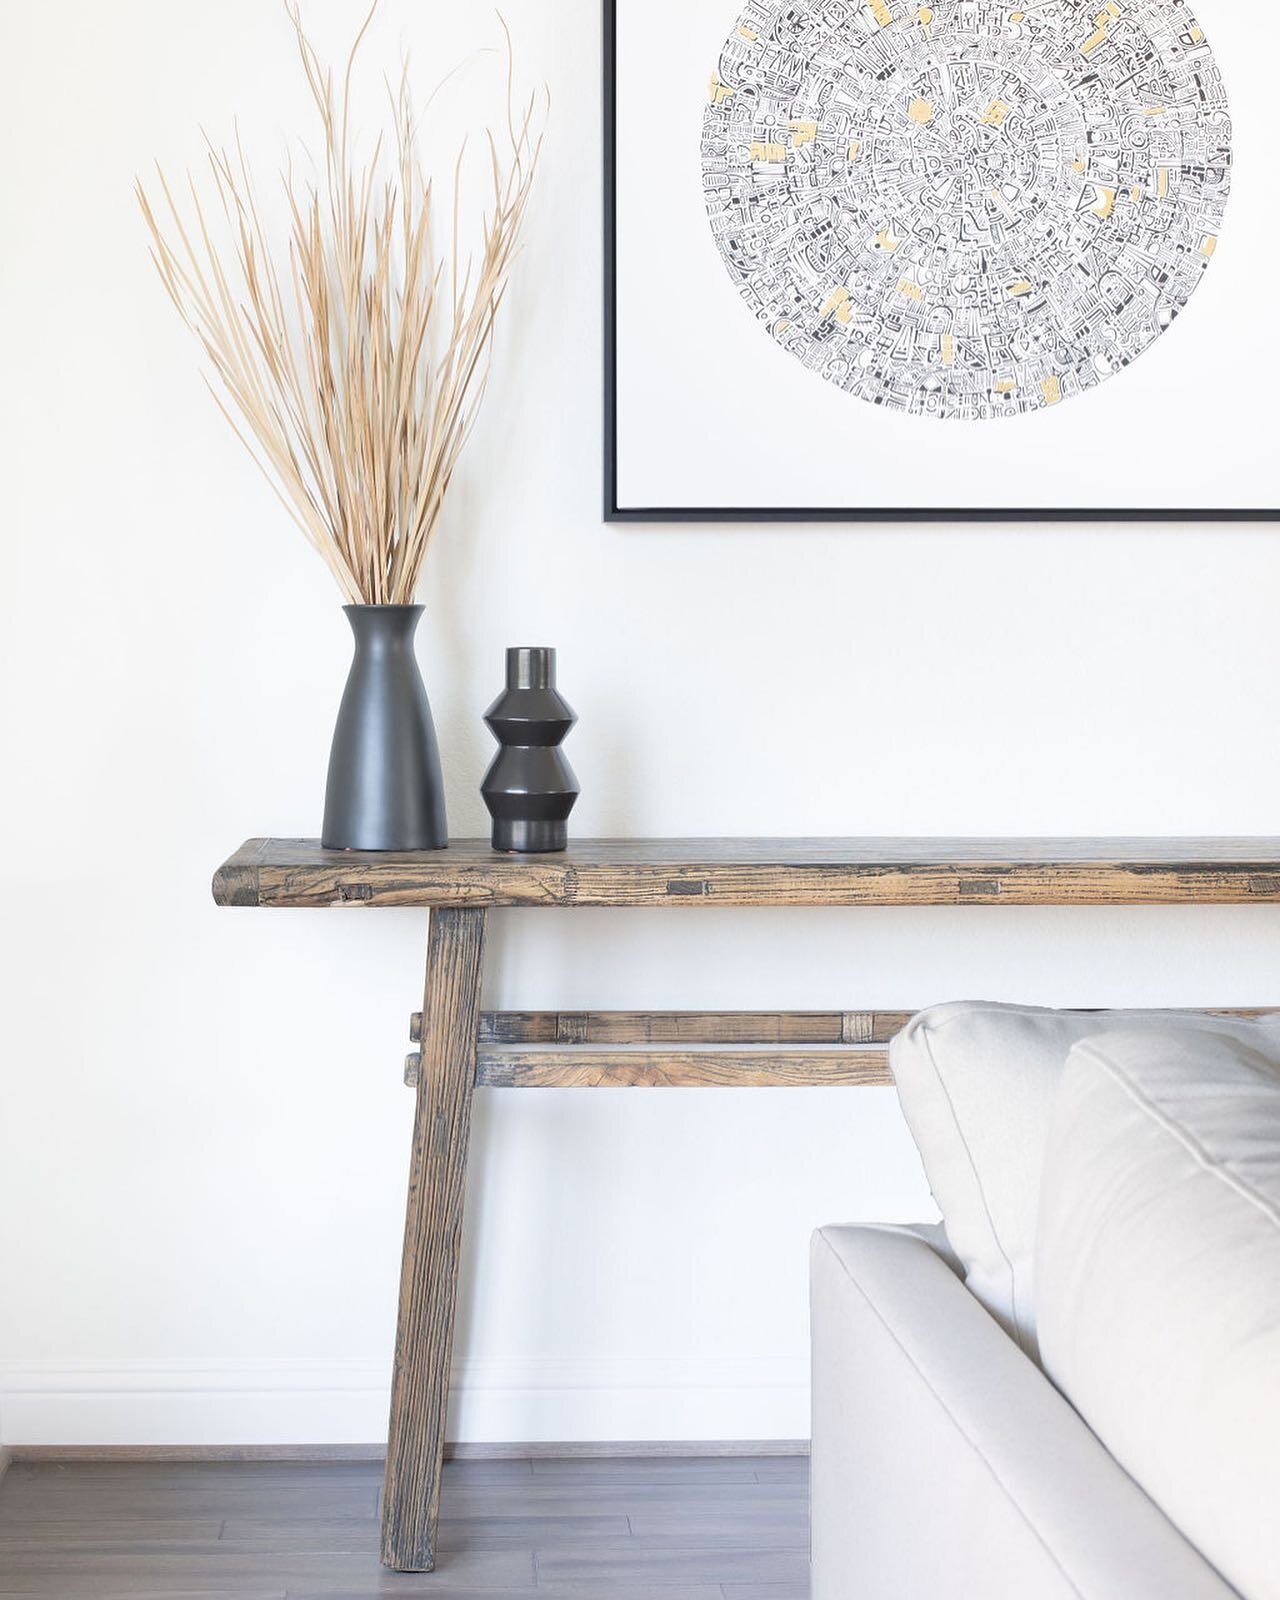 How about that close up? This console table was the perfect amount of rustic for this project, and delivers that authentic look amongst the mostly modern furnishings throughout. A piece that adds character to the space, while the white  backdrop high